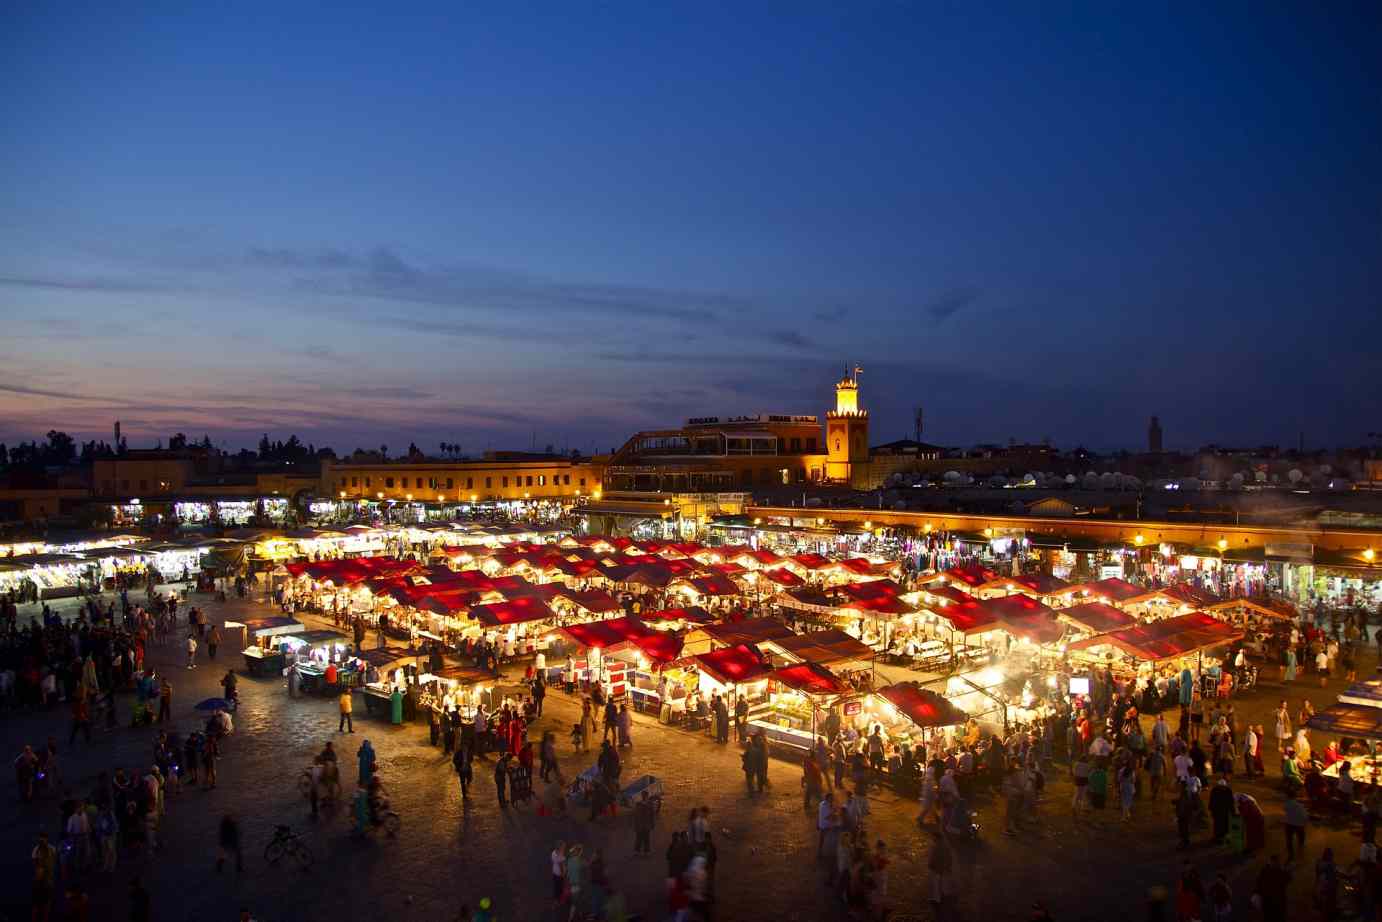 What to See and Where to Stay During Holiday in Morocco?